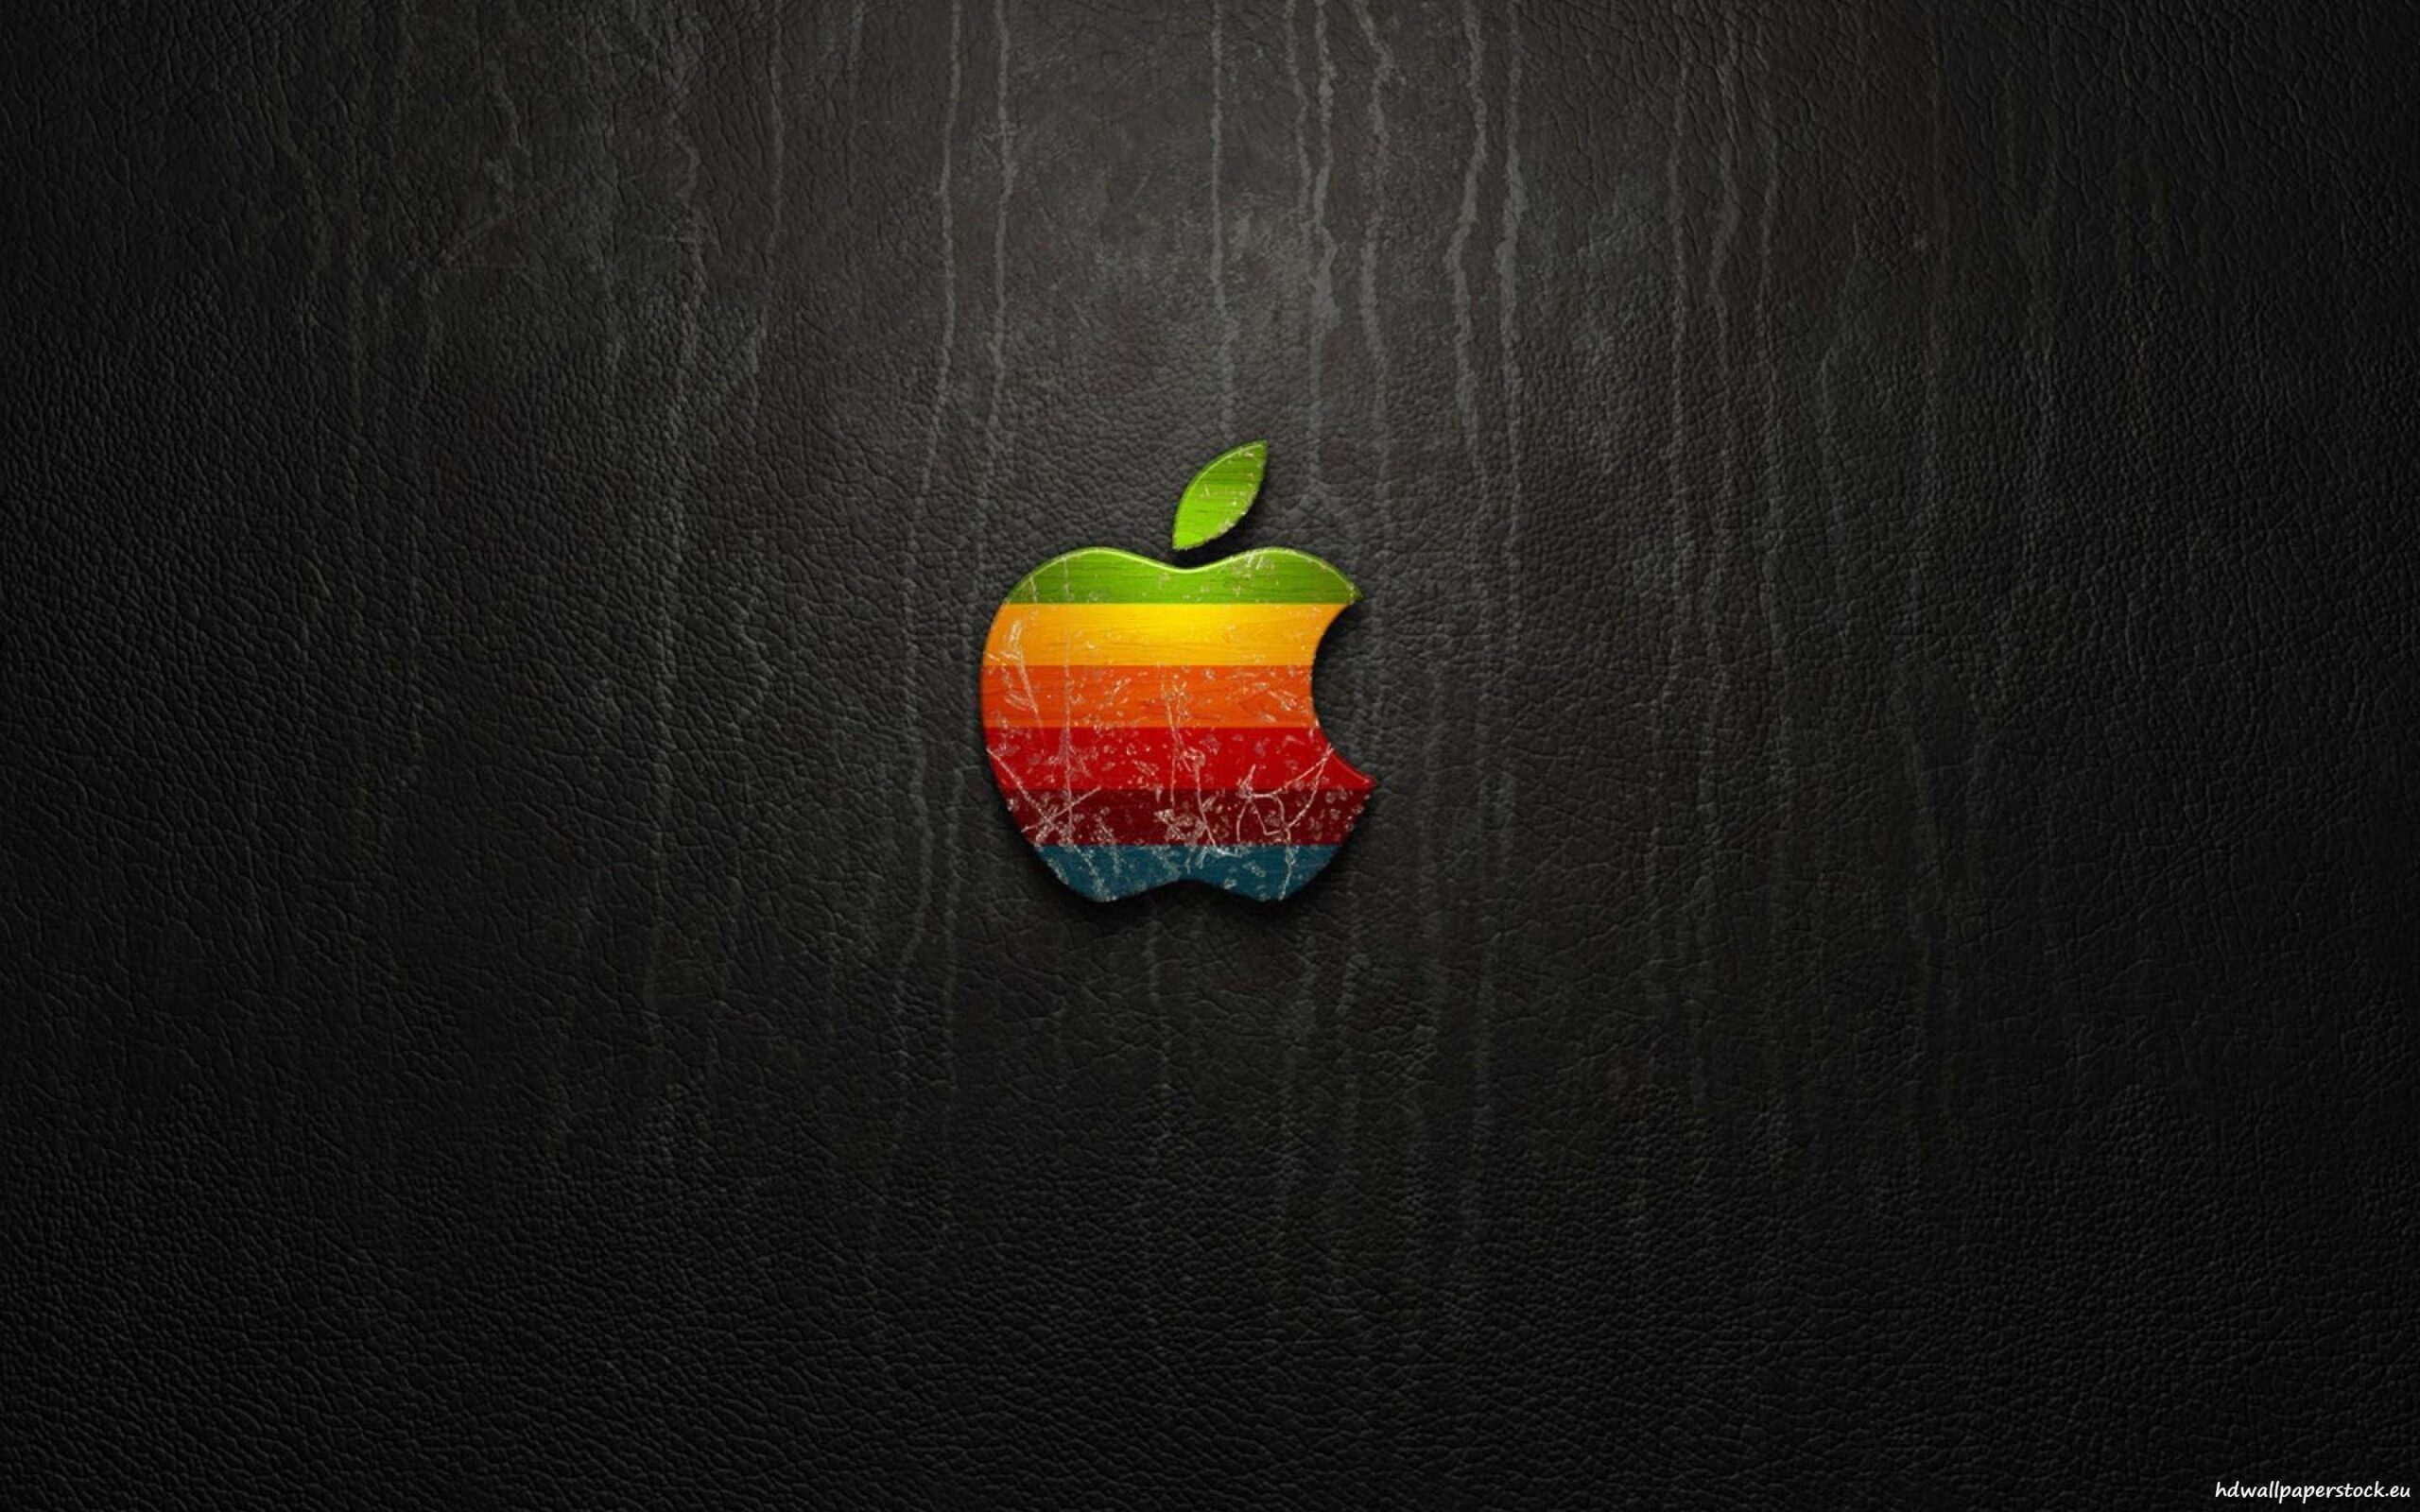 Apple 4K Ultra Hd Wallpapers, Apple, Other